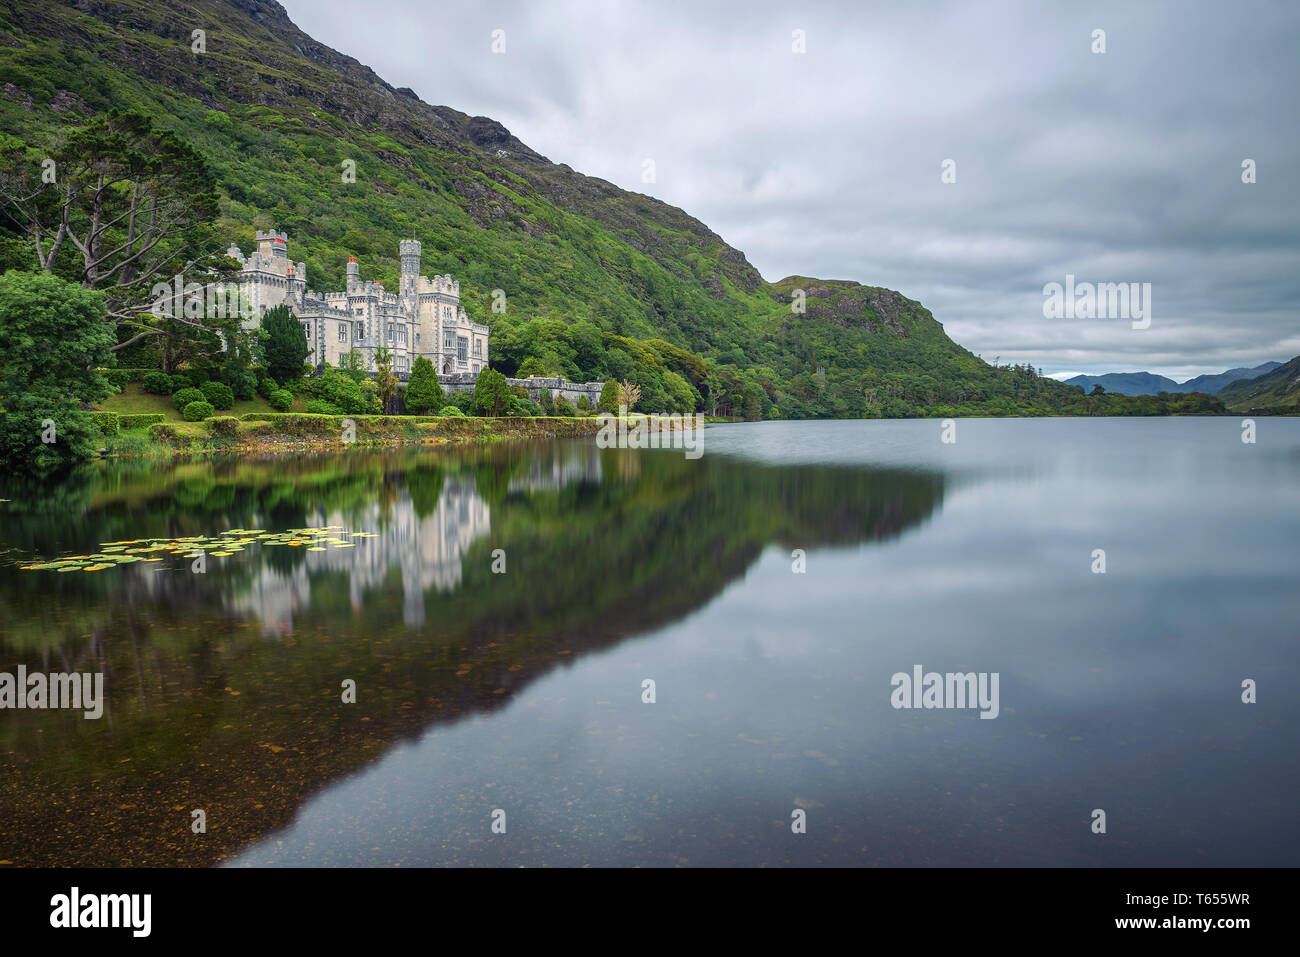 Kylemore Abbey in Ireland with reflections in the Pollacapall Lough Stock Photo